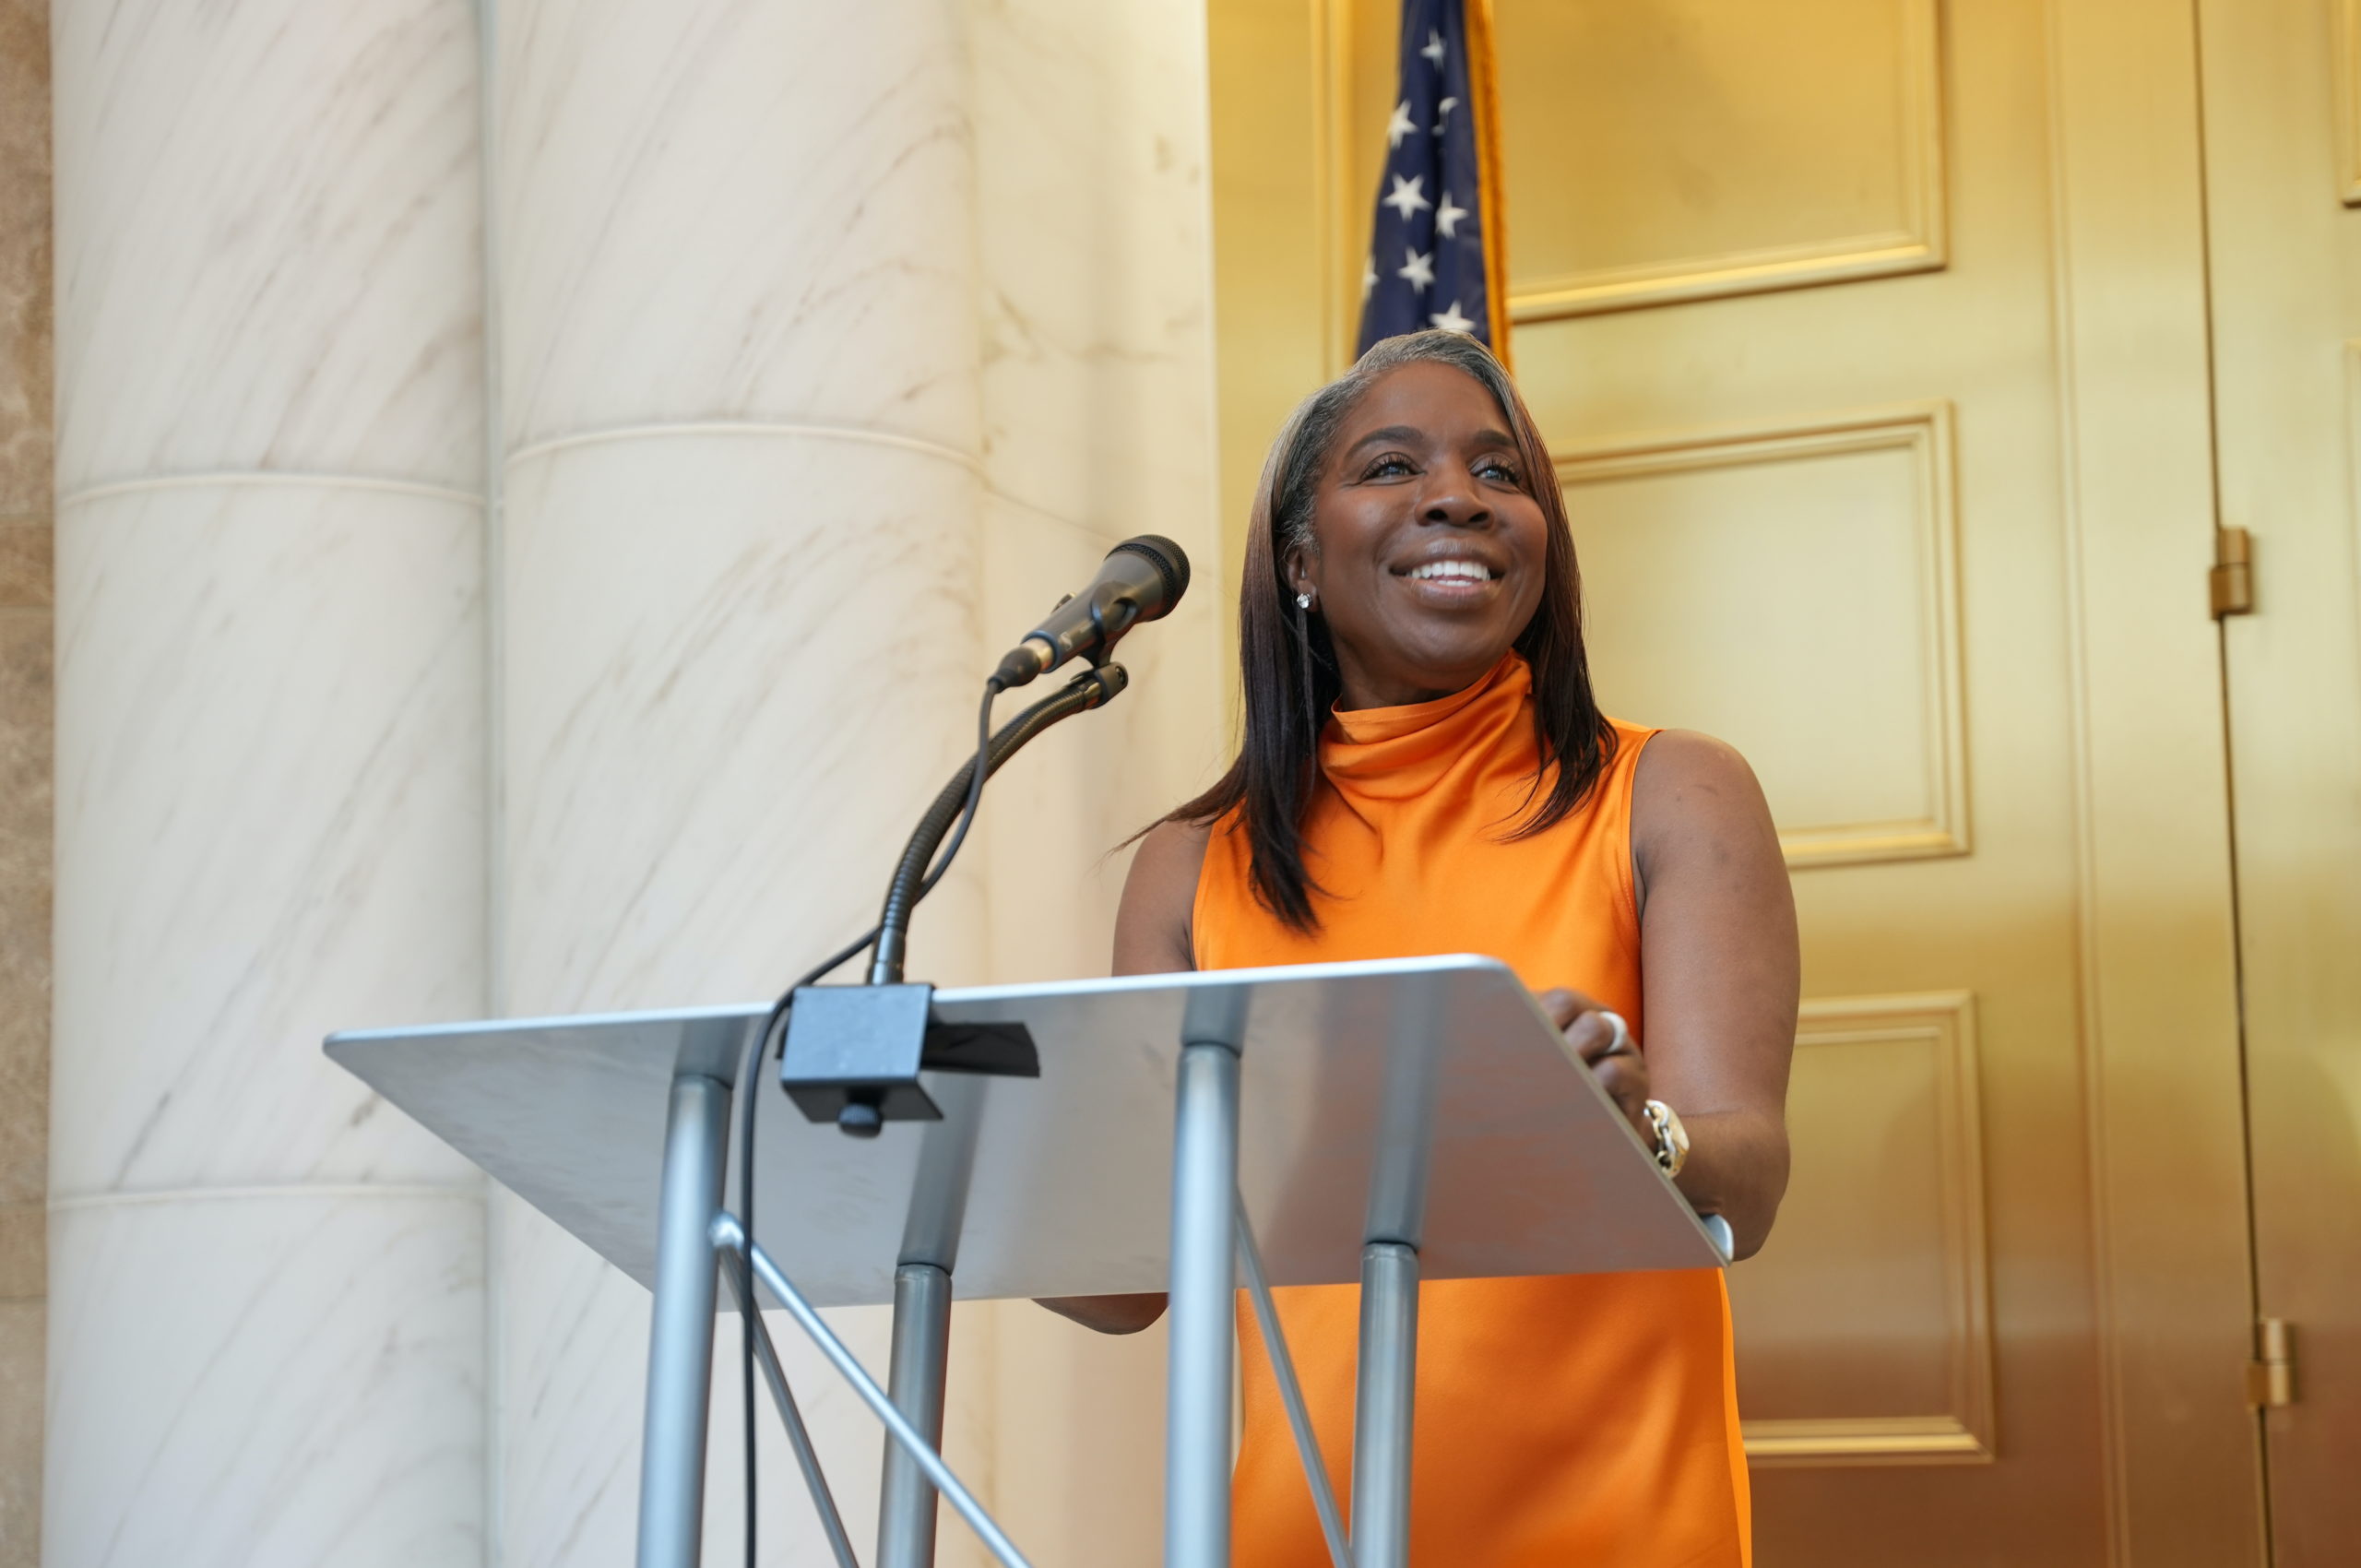 A middle aged Black woman in an orange formal dress stands in front of a podium with a microphone and smiles. In the background are gold doors, marble pillars and an American flag. 